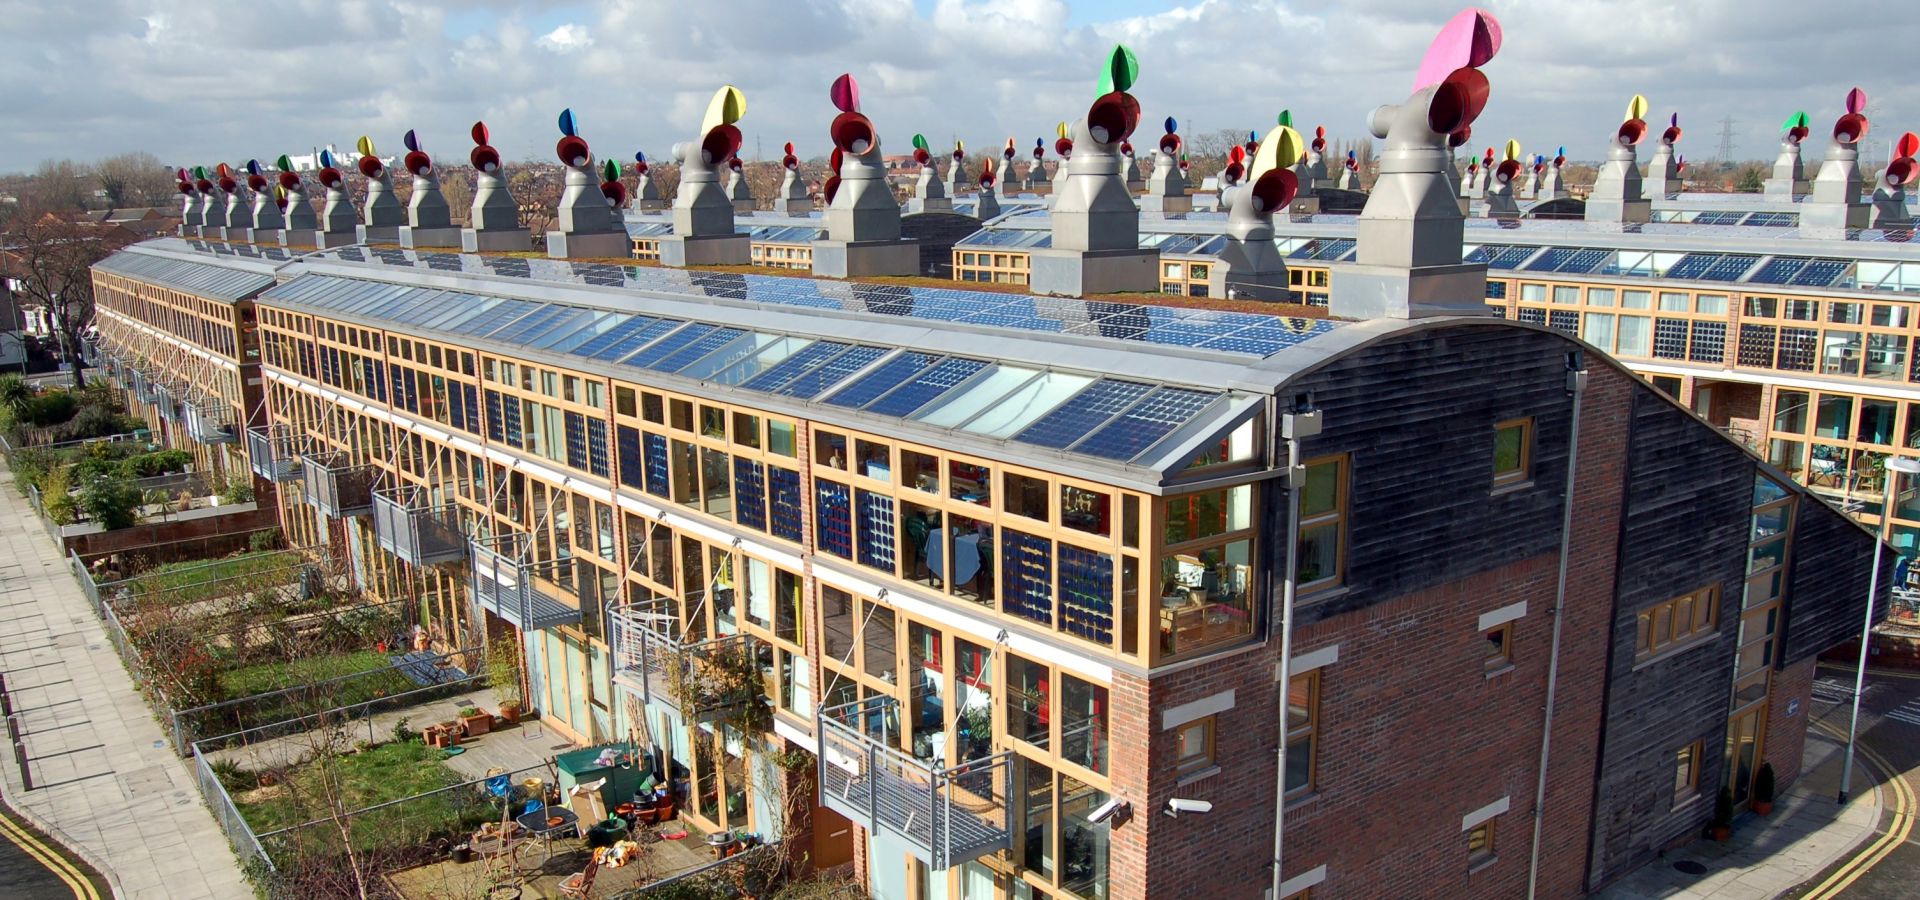 view of rooftops of the eco village BEdZED in the UK